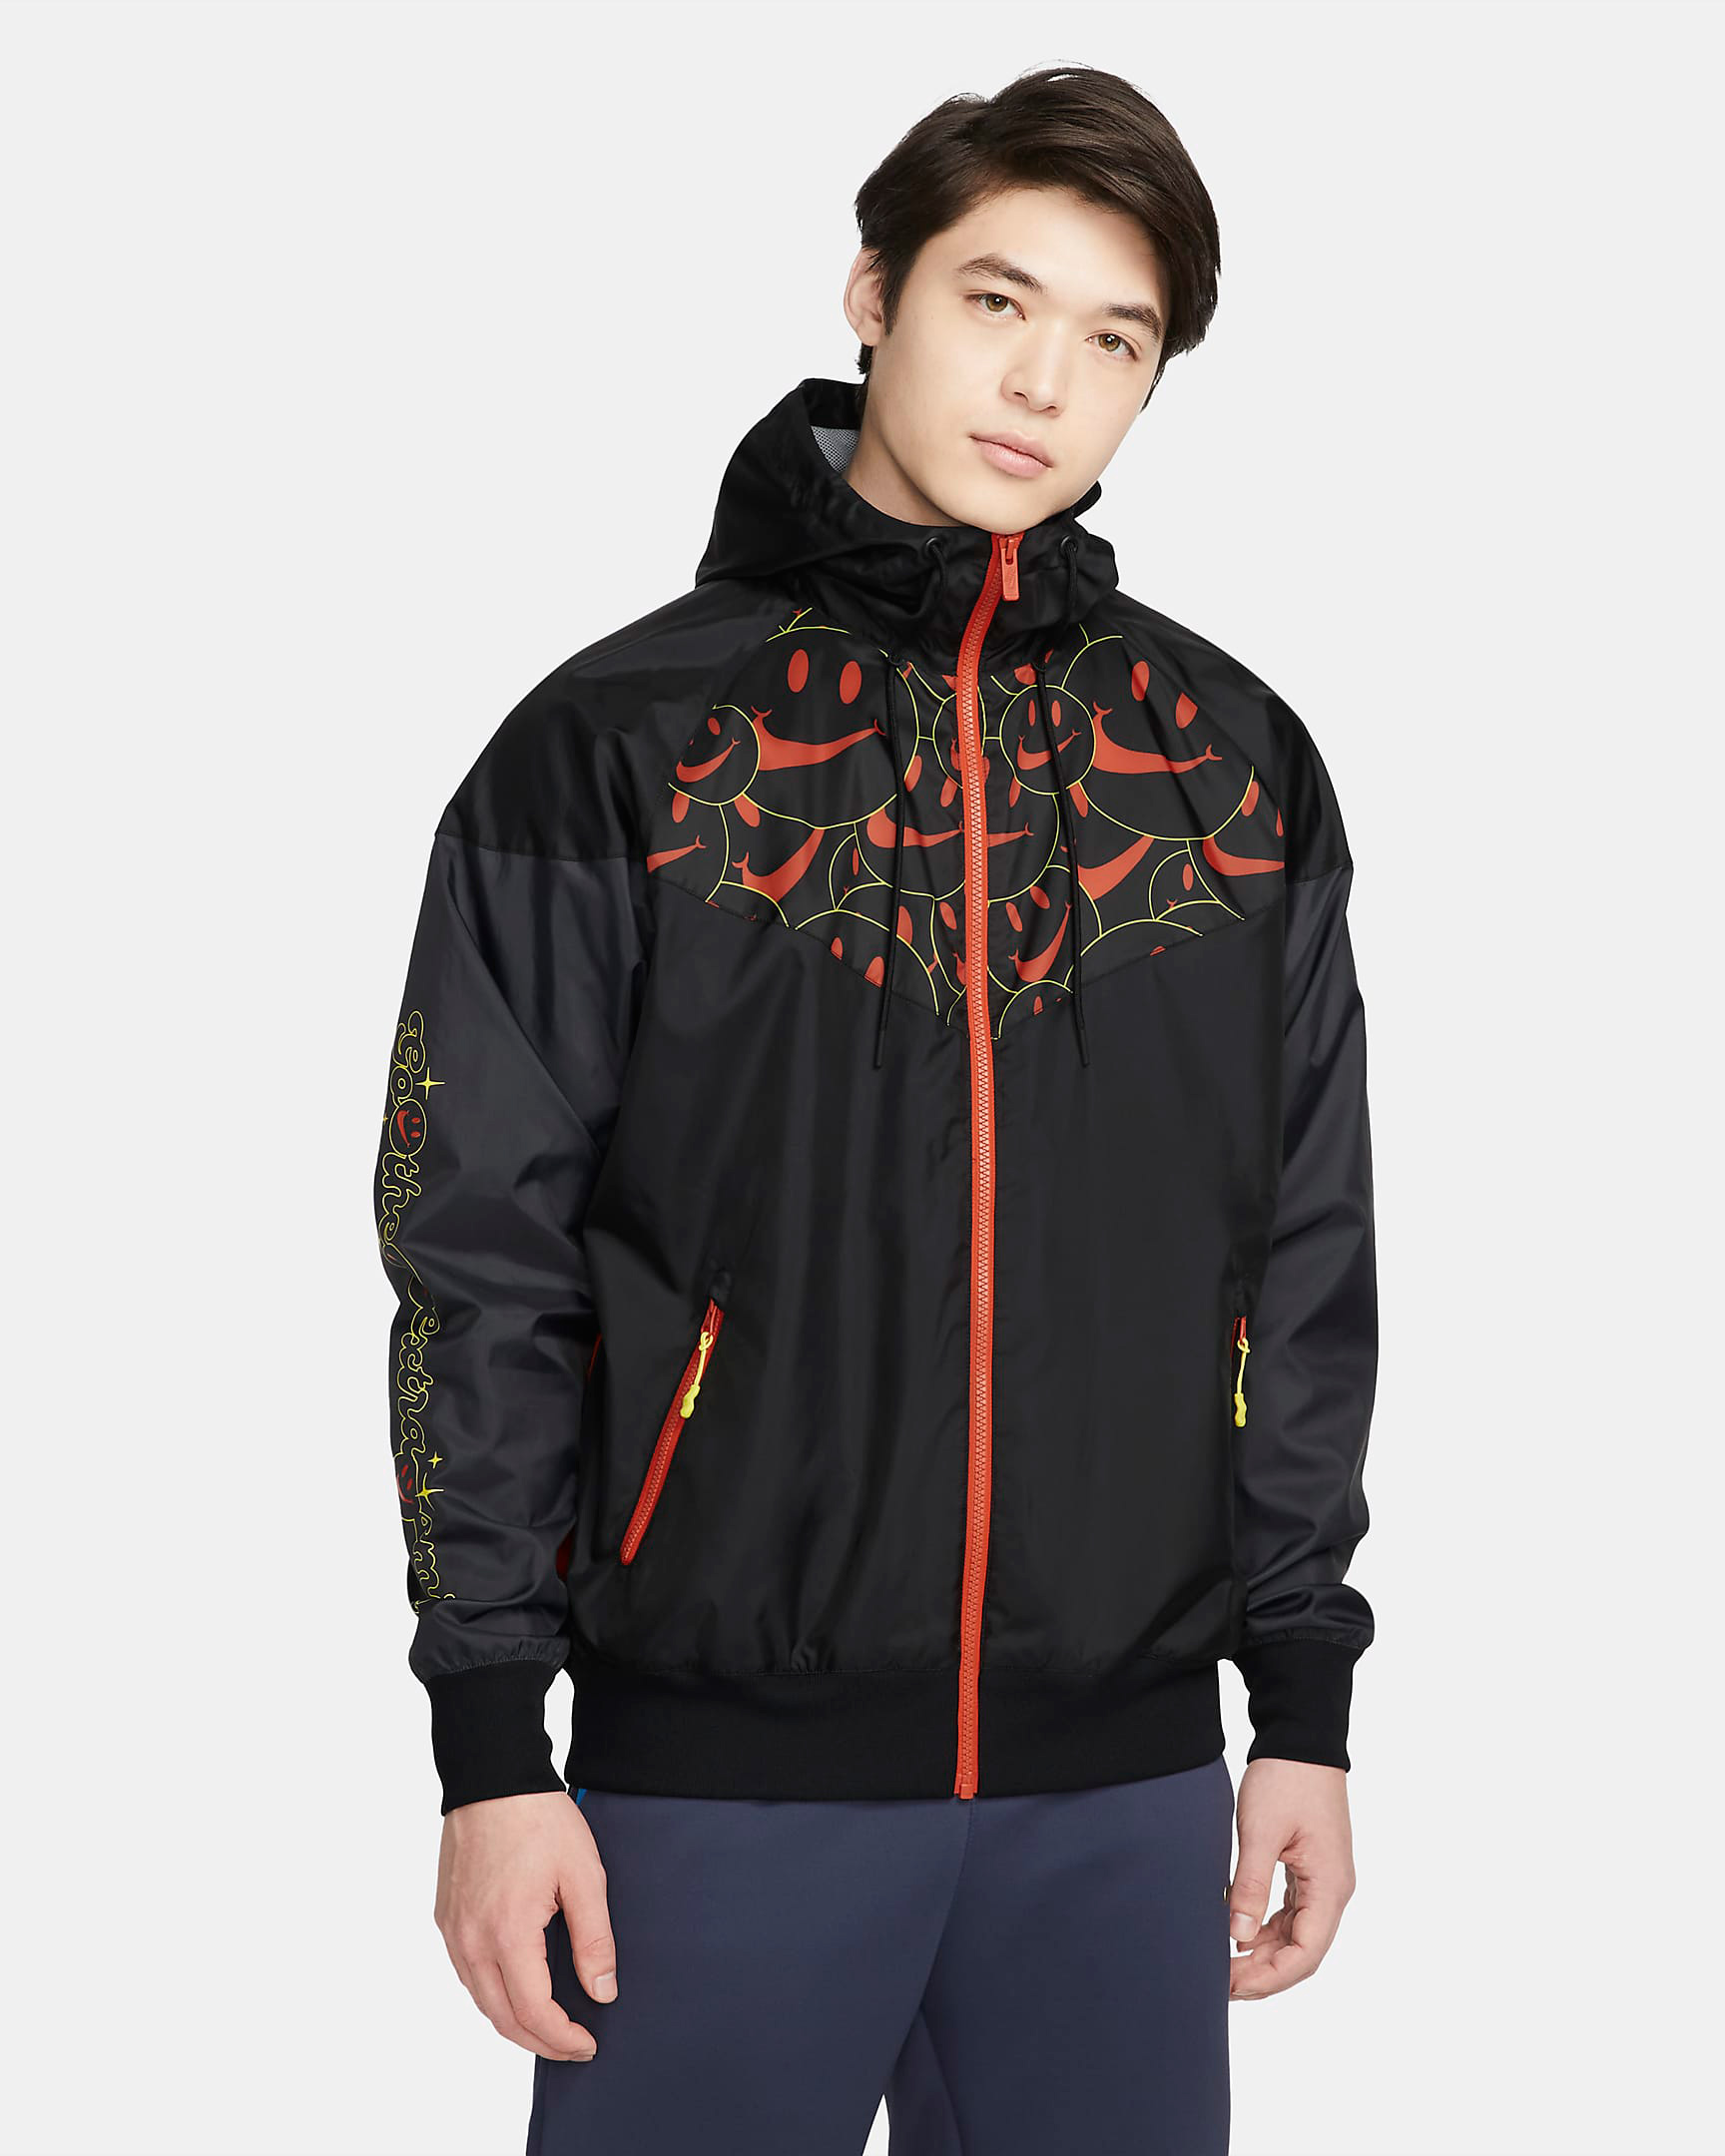 nike-go-the-extra-smile-windrunner-jacket-black-red-yellow-1